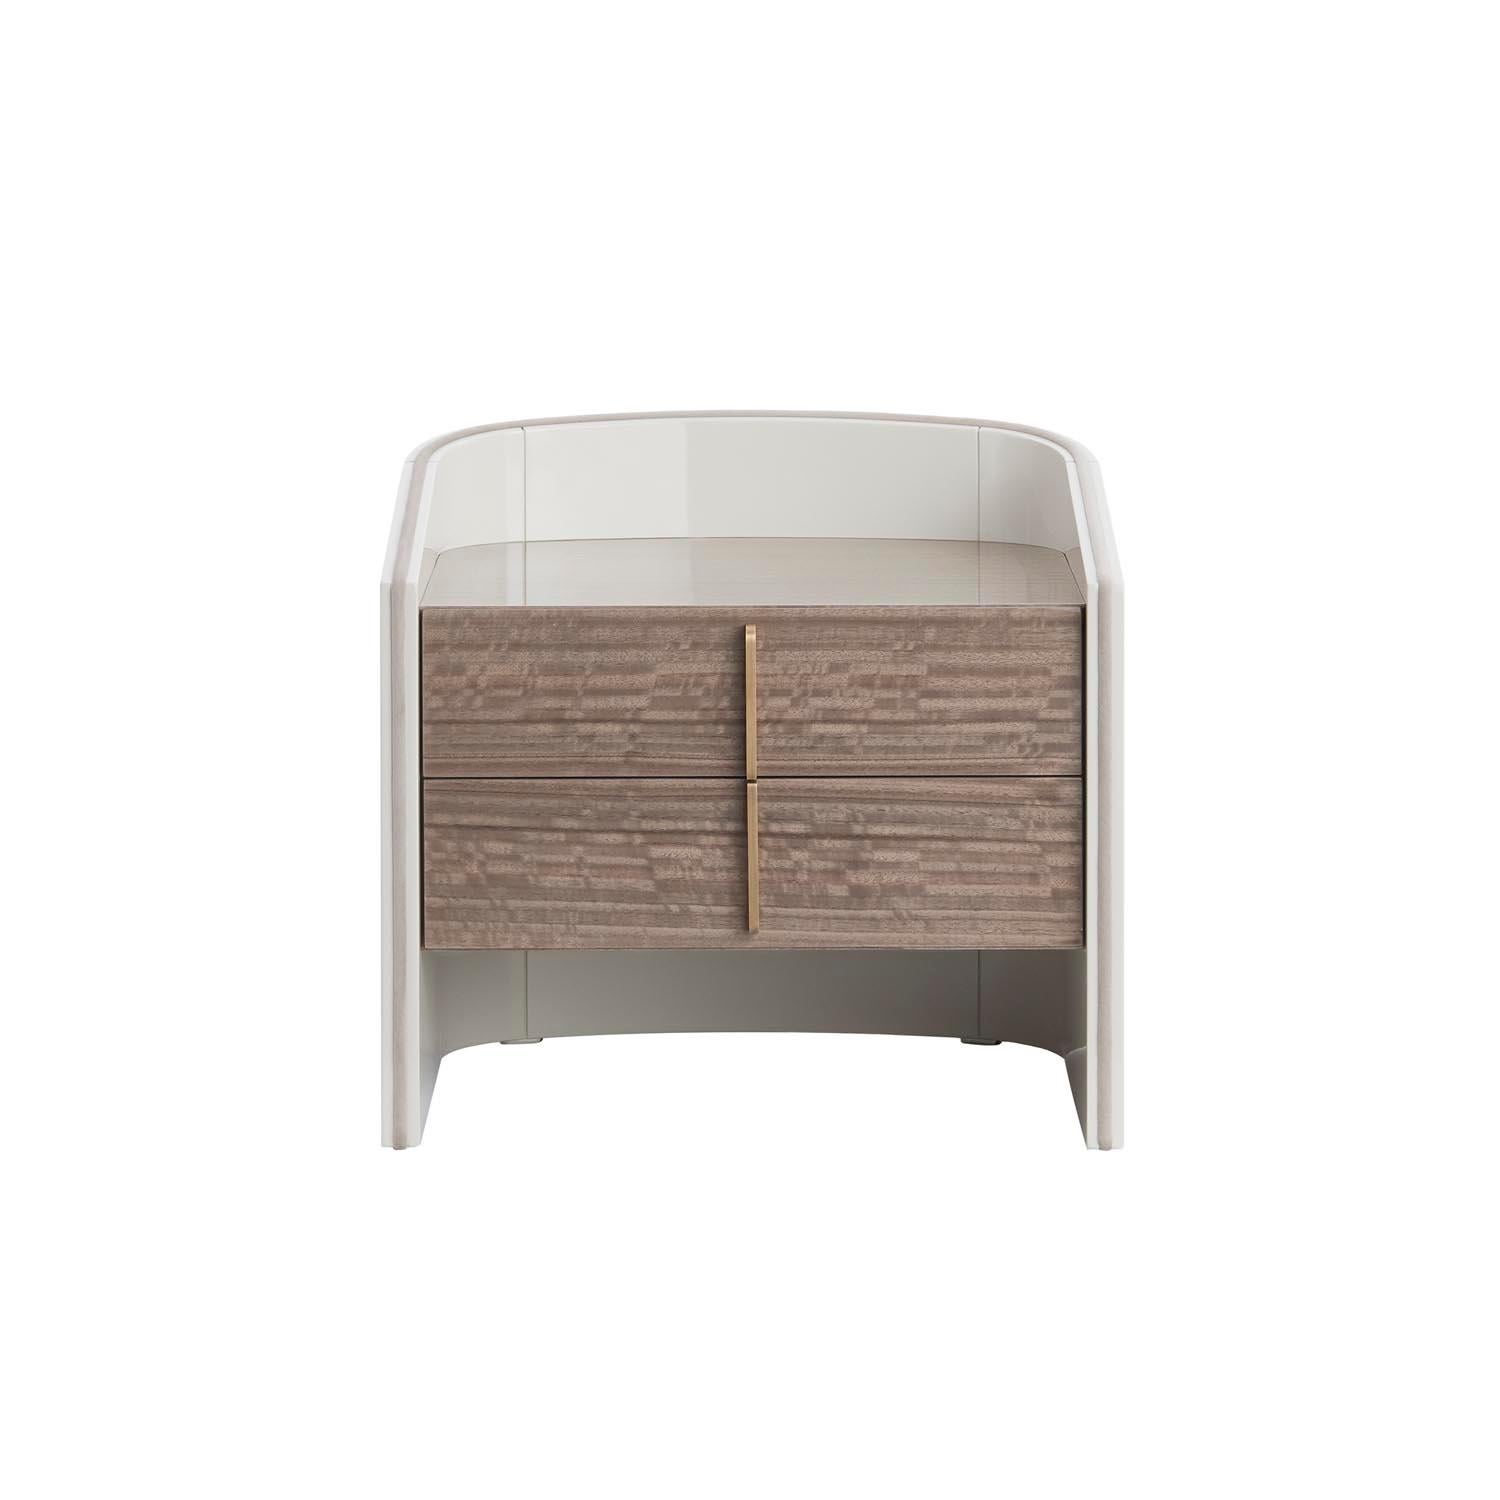 Elegant and sophisticated, the bedside table Coralina is characterized by a curved structure in lacquered finish, on which the drawers in veneered wood are inserted.‎ This bedside also allows the combination of different finishes between the curved